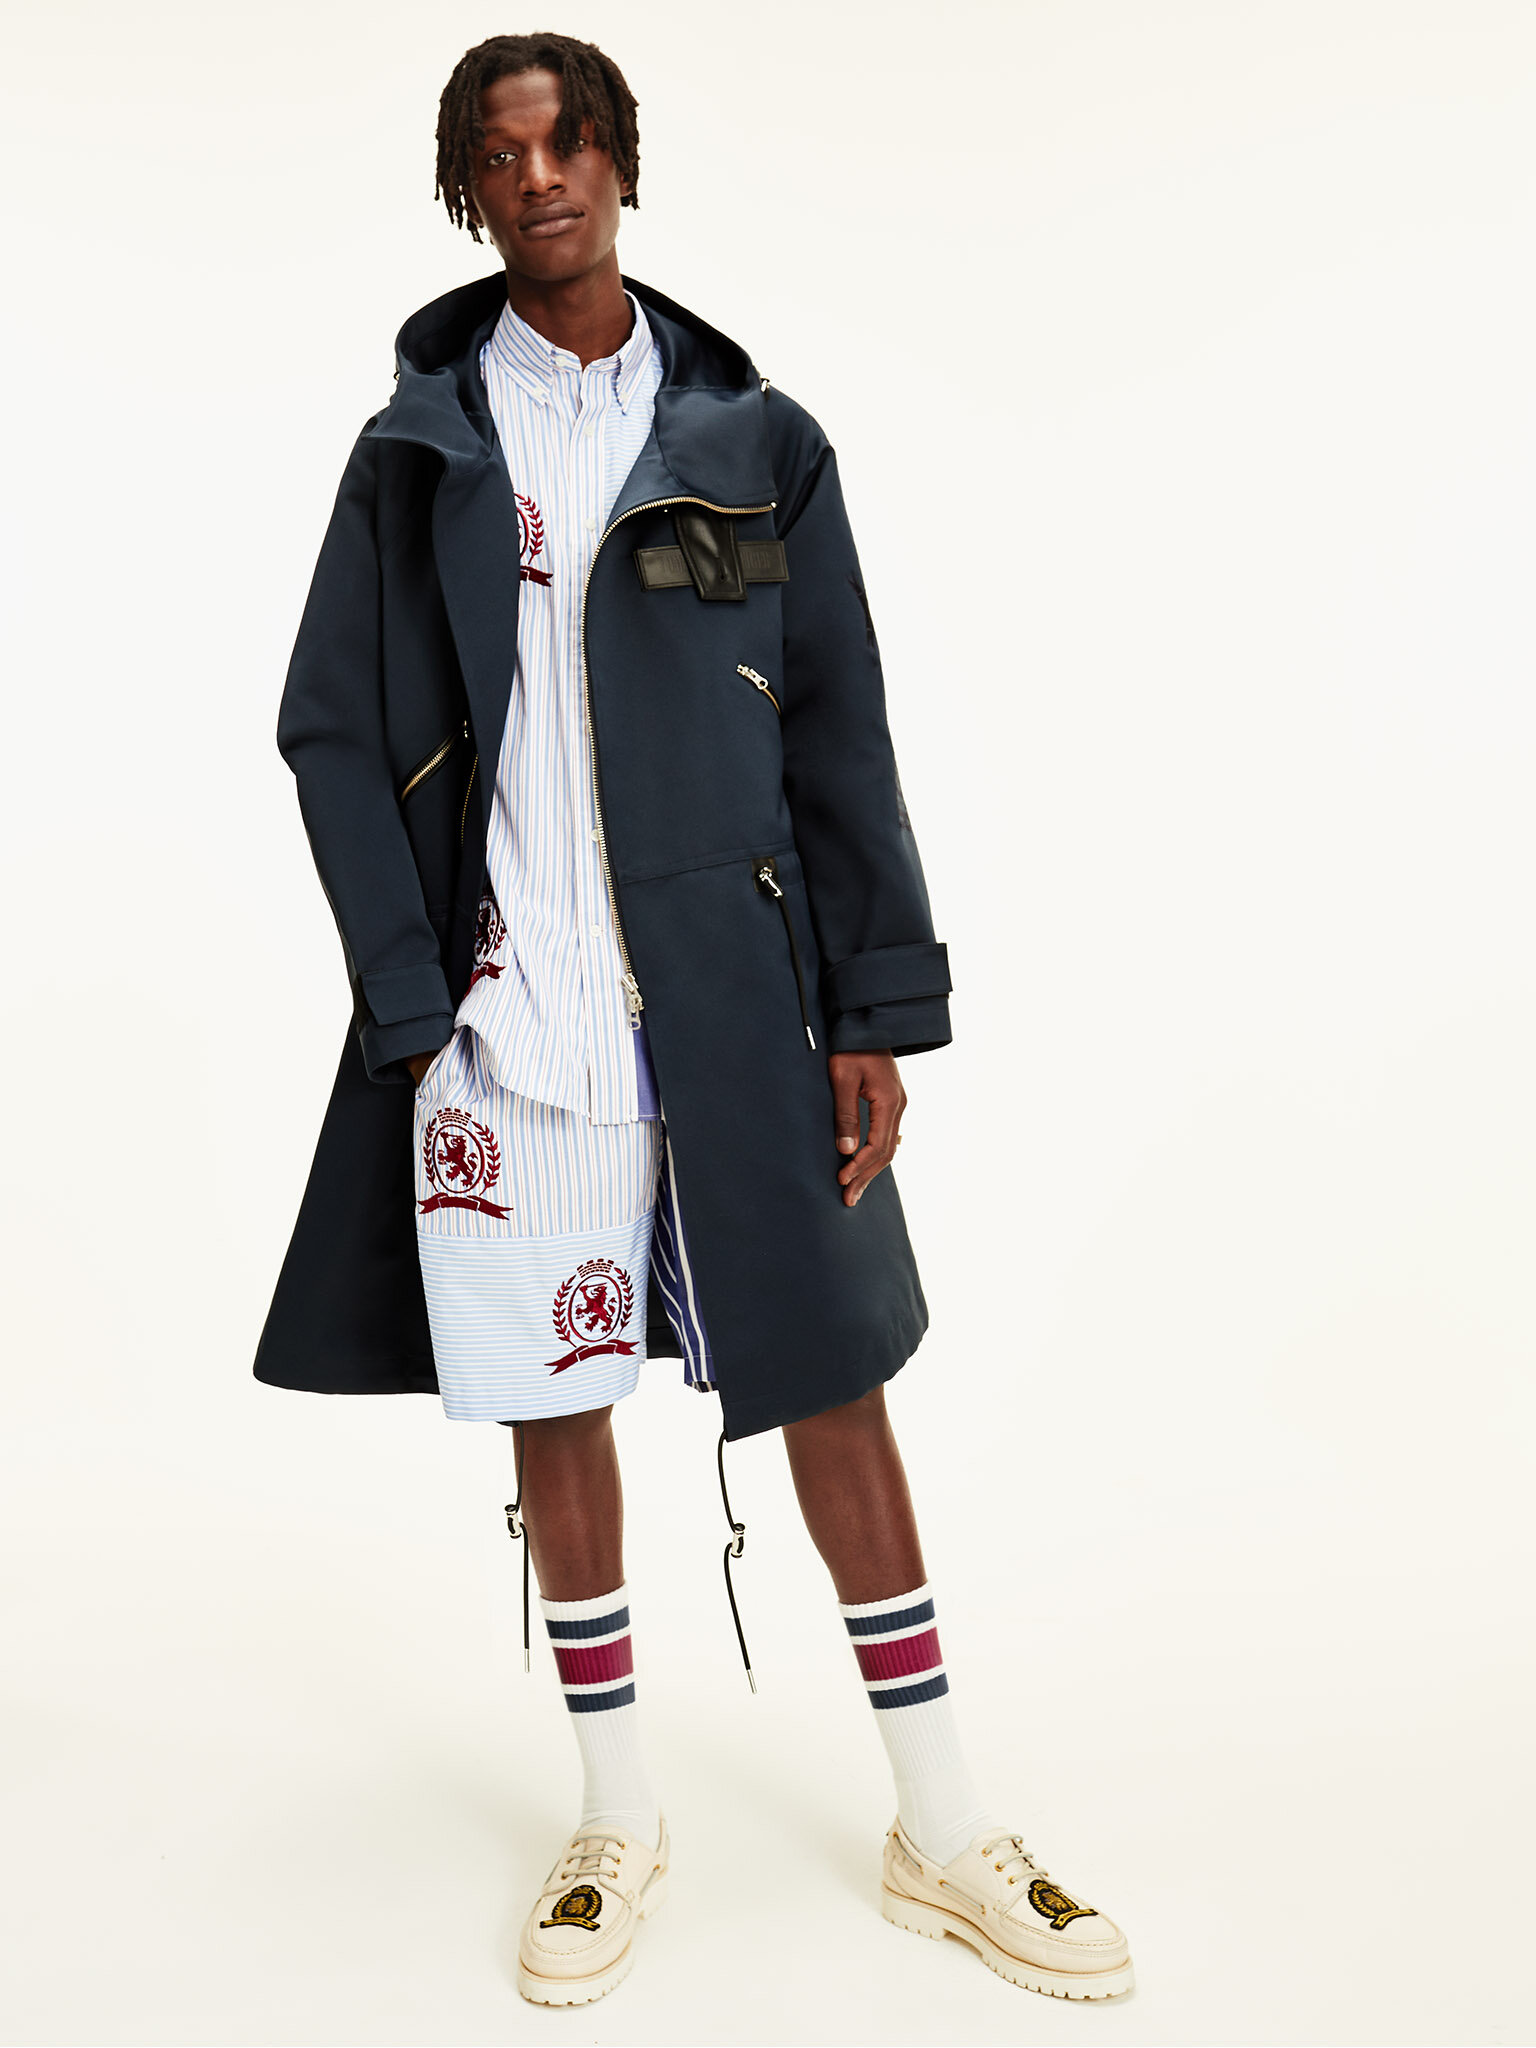 SP21_Tommy Hilfiger Collection_LOOK02.jpg